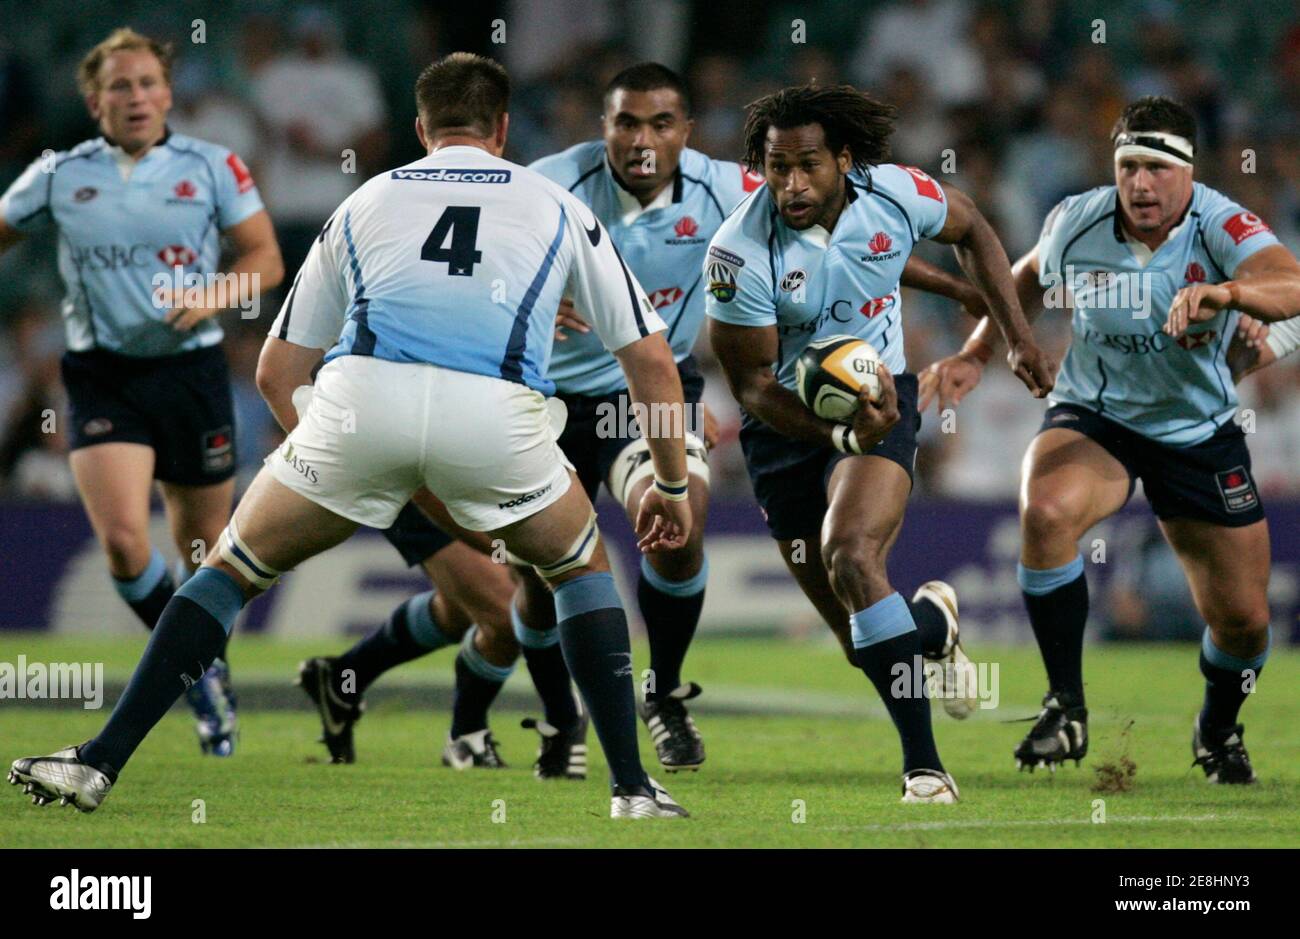 Lote Tuqiri of the NSW Waratahs from Australia (2nd R) is supported by team mates Brett Sheehan (L) Wycliff Palu (3rd L) and Al Baxter (R) as he faces the defence of Bakkies Botha of the Bulls from South Africa during their Super 14 rugby match in Sydney March 10, 2007. REUTERS/Will Burgess   (AUSTRALIA) Stock Photo